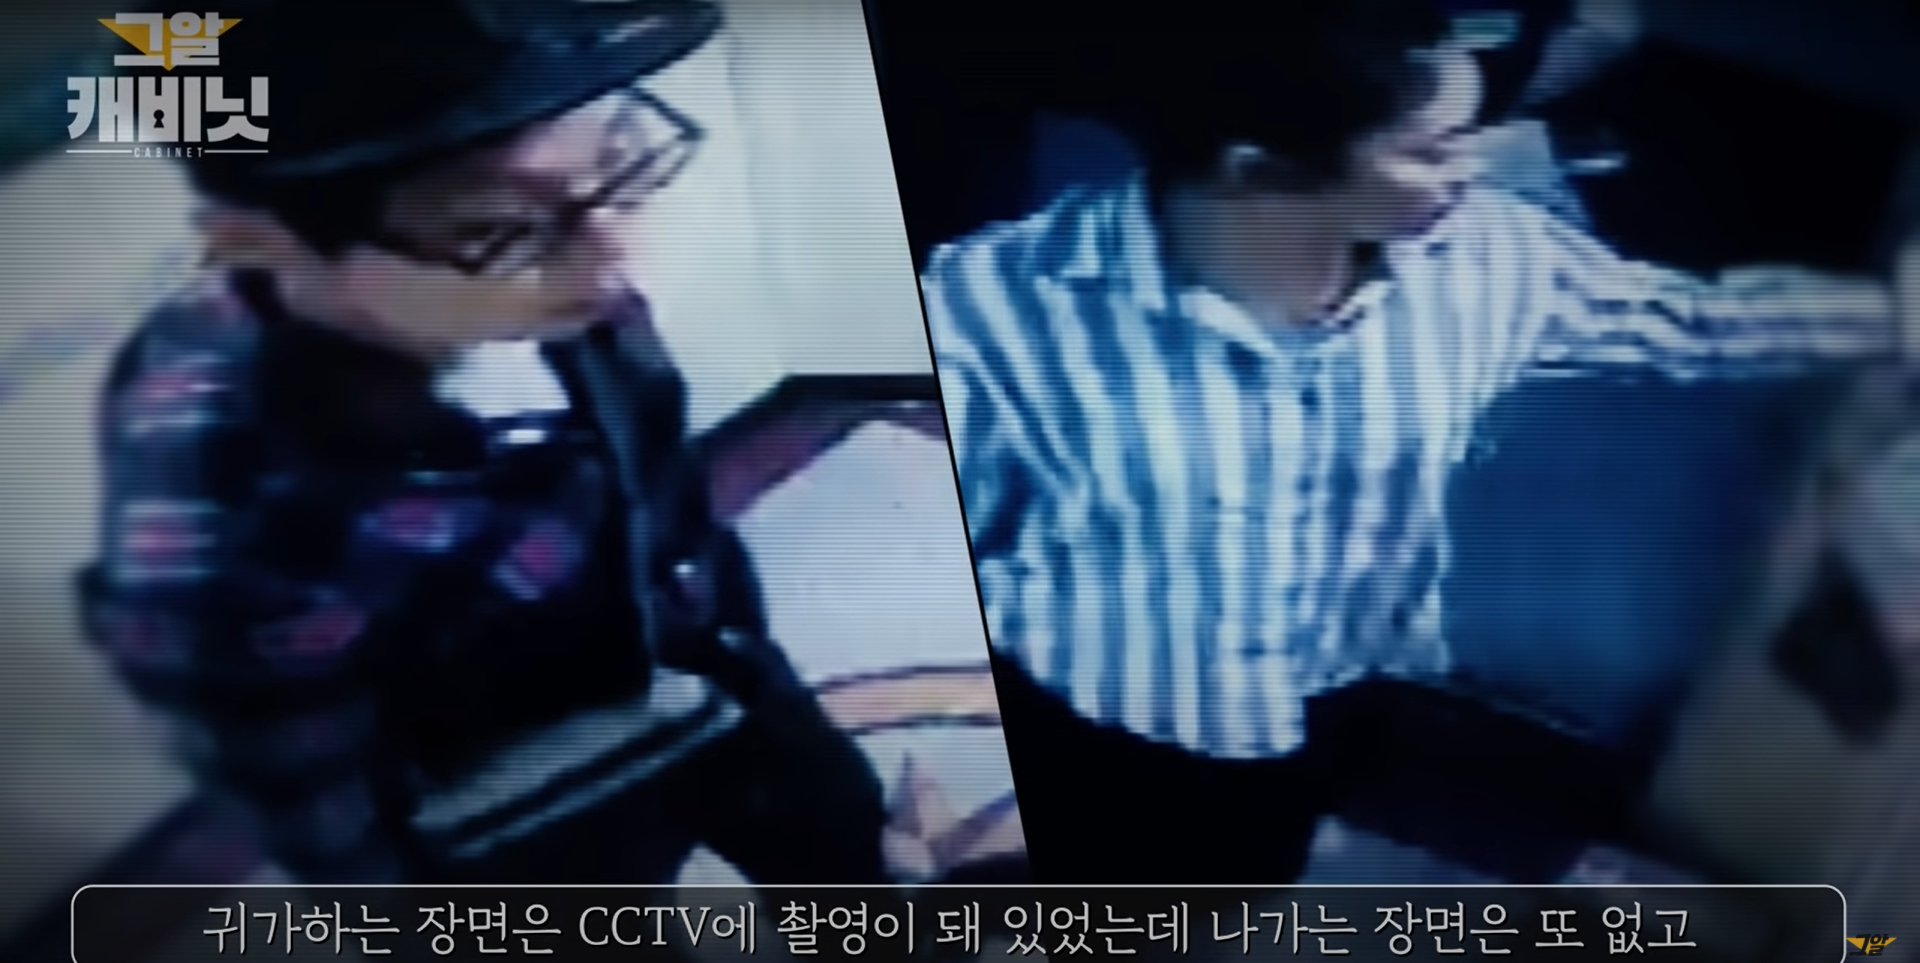 unsolved crimes in korea - cctv footage